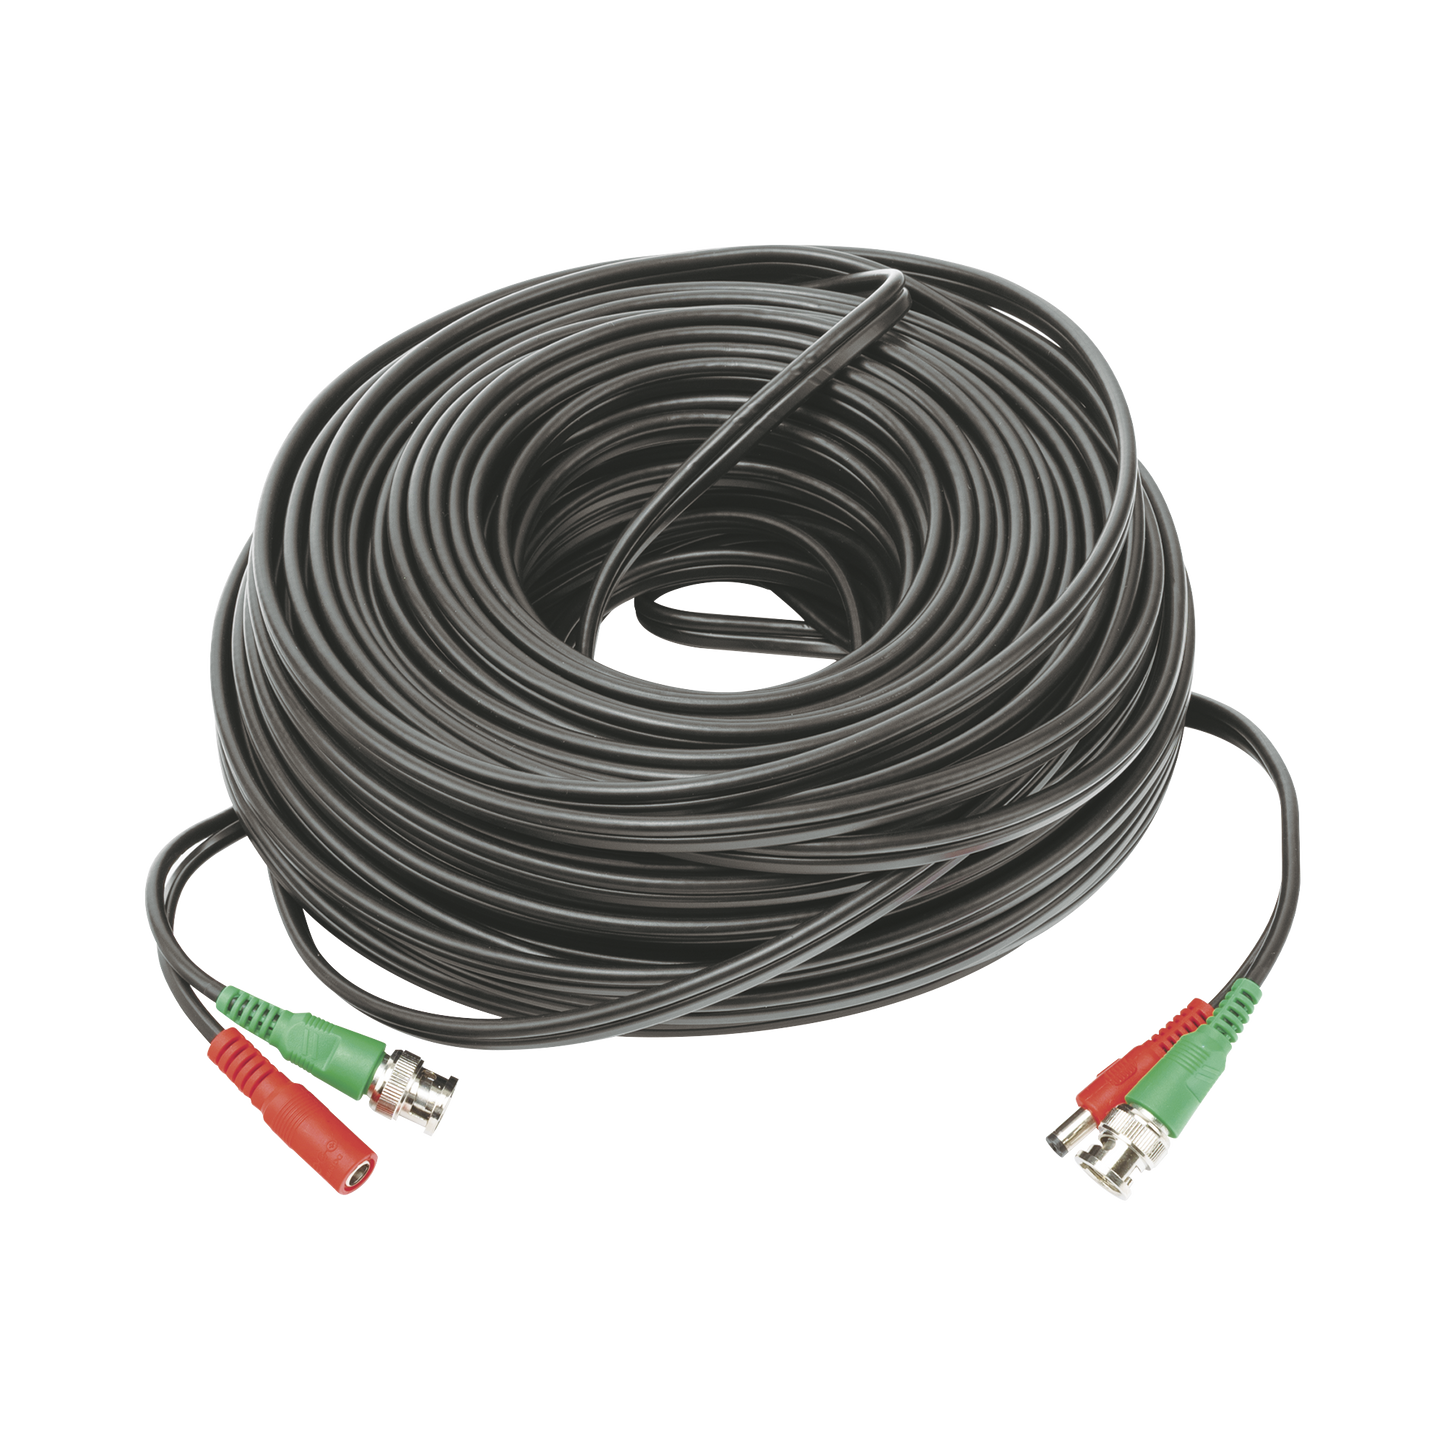 40 meters / Coaxial cable ( BNC )  + Power / 100% Copper / For 4K Cameras / Indoor use